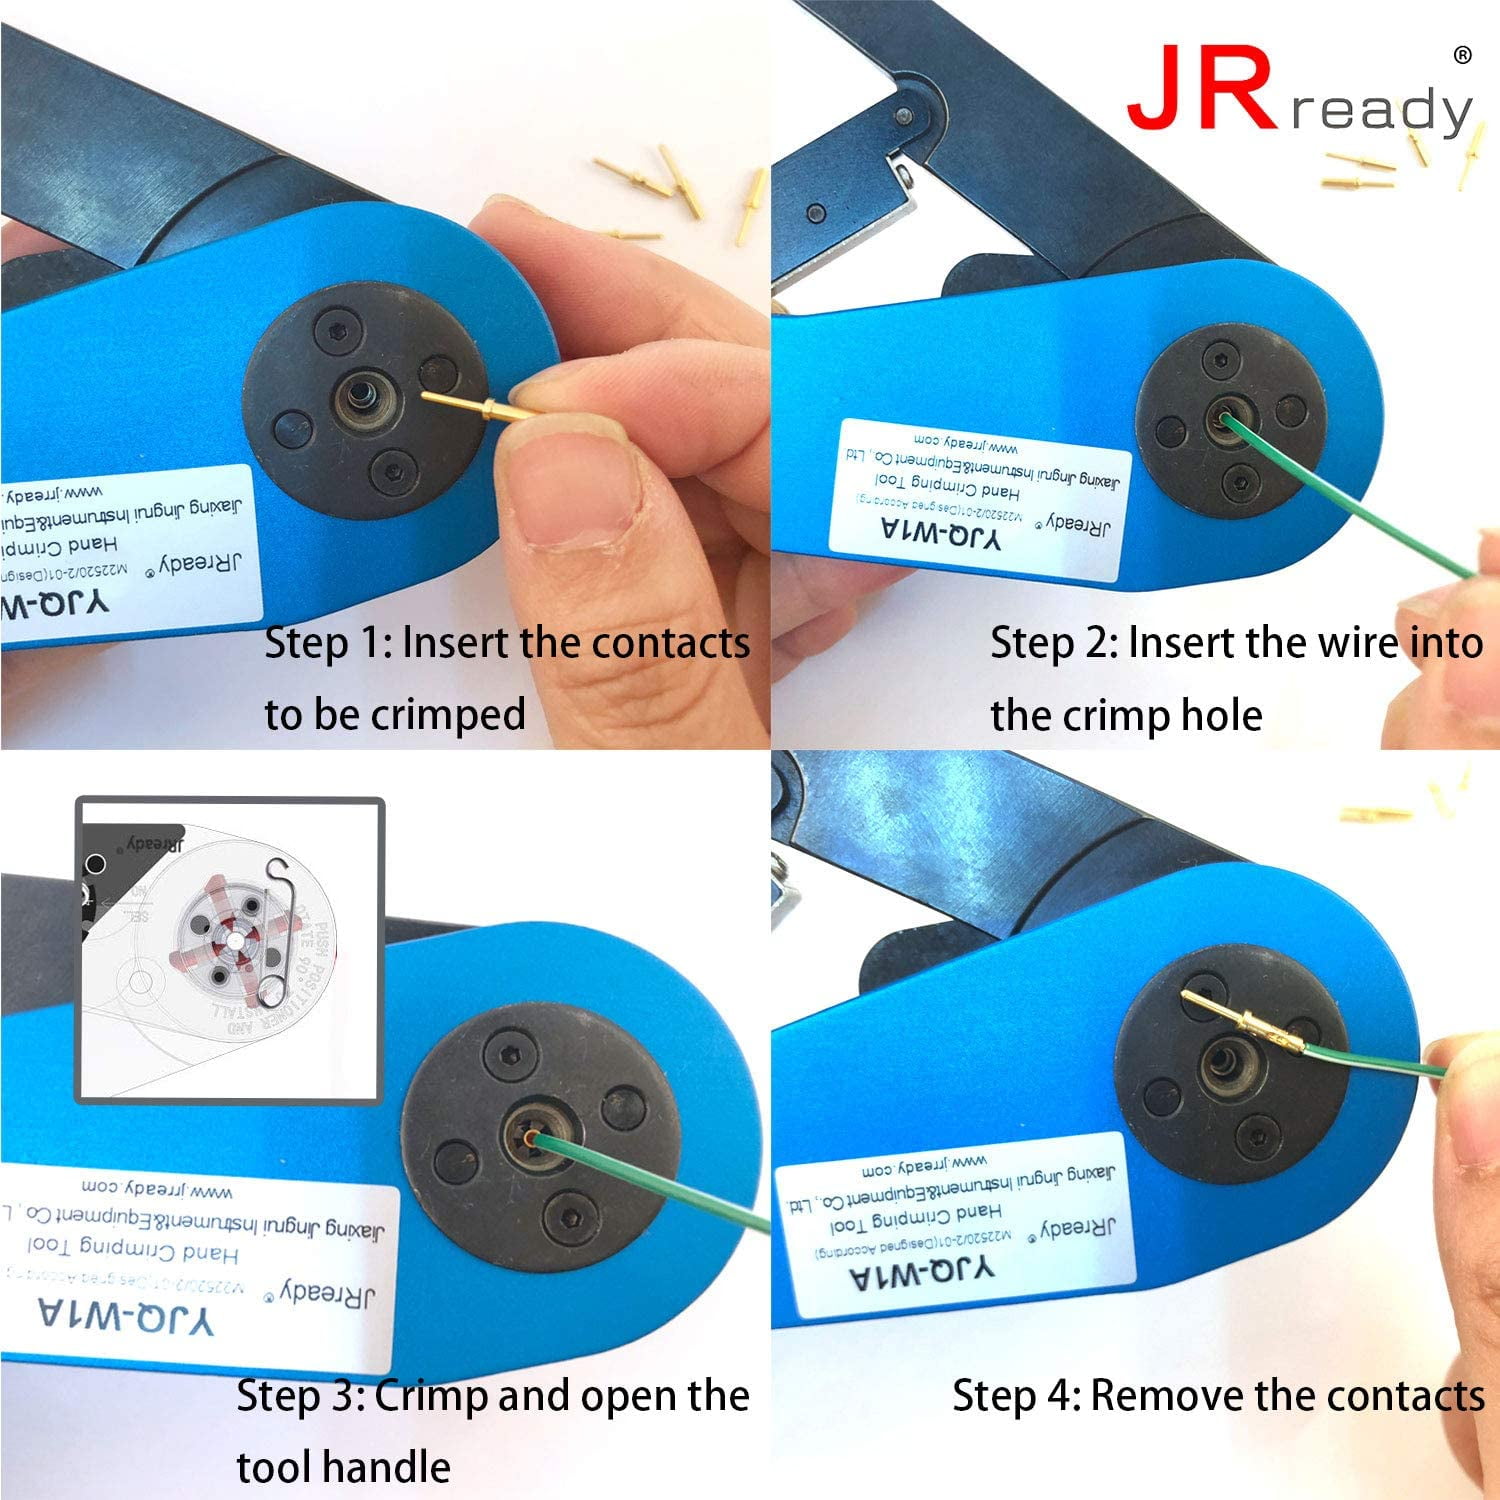 Tool Contact and in Kit Barrel 01 Gauge M22520 and G125 of Aviation Crimper 20 for JRready Solid 2 615717 Positioner Electronic 7 Connector Miniature Indent W1A YJQ Systems Crimp 32awg ST2060